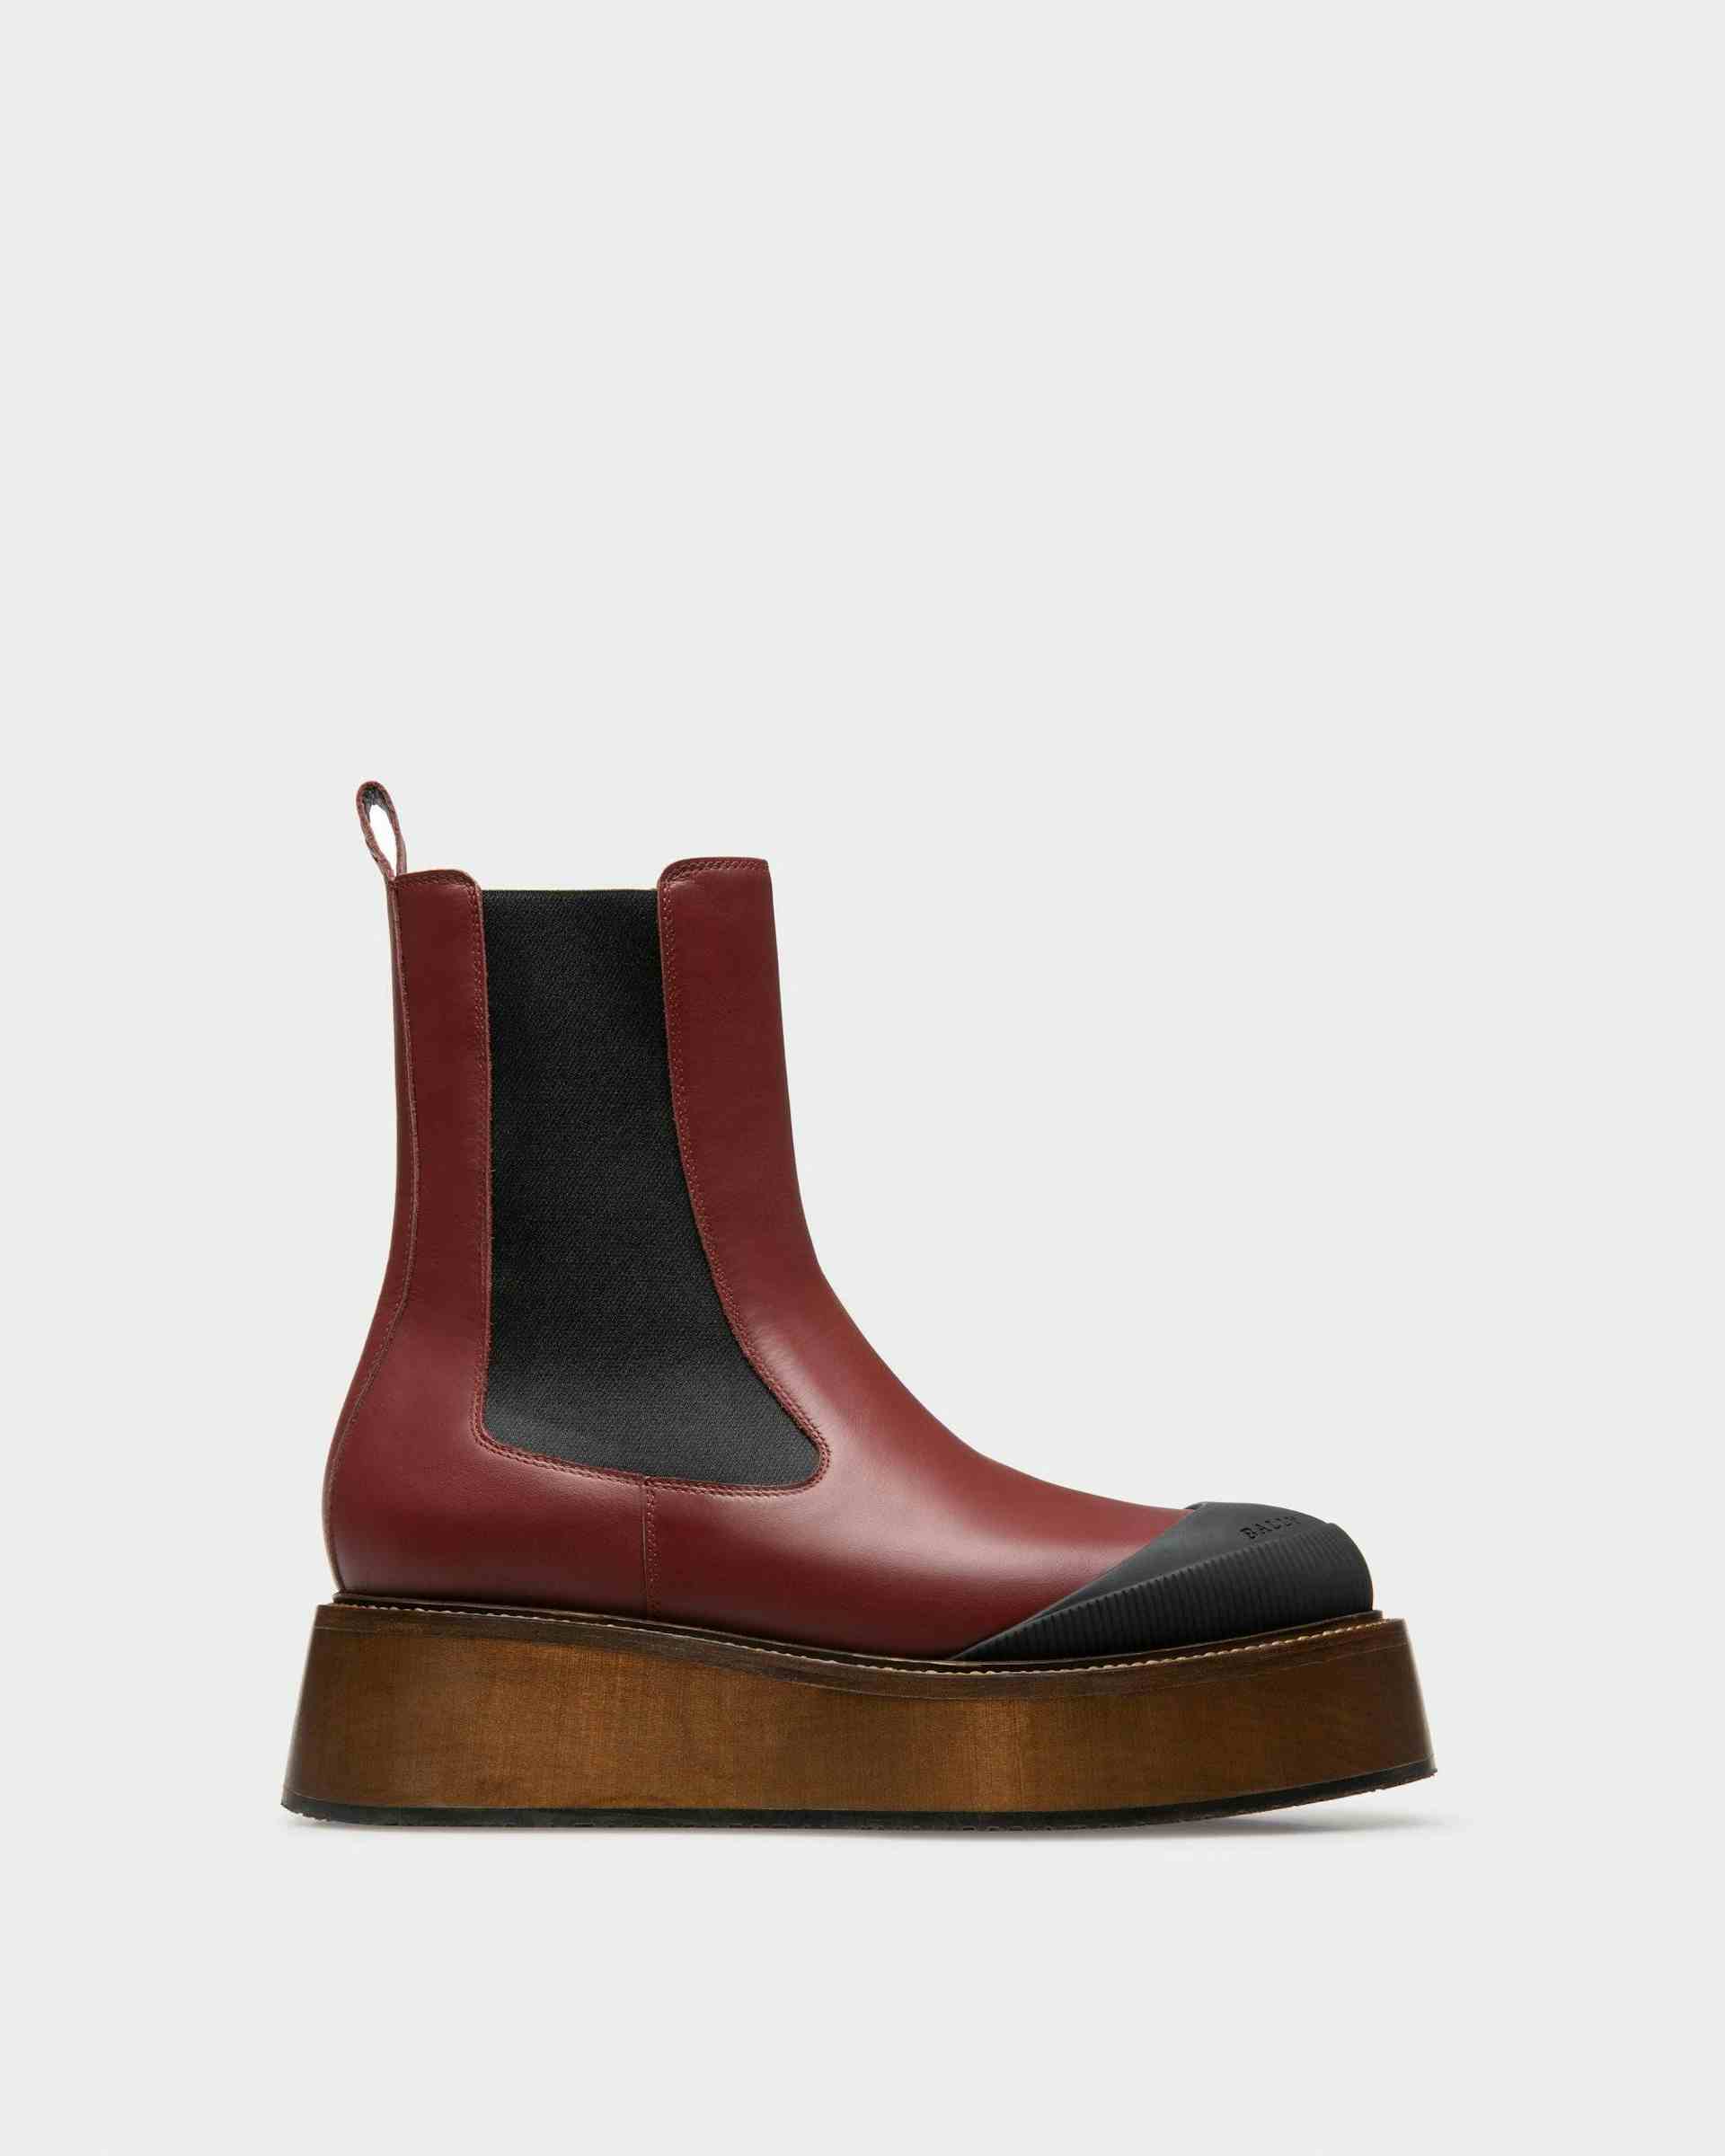 Ilene Leather Booties In Heritage Red - Women's - Bally